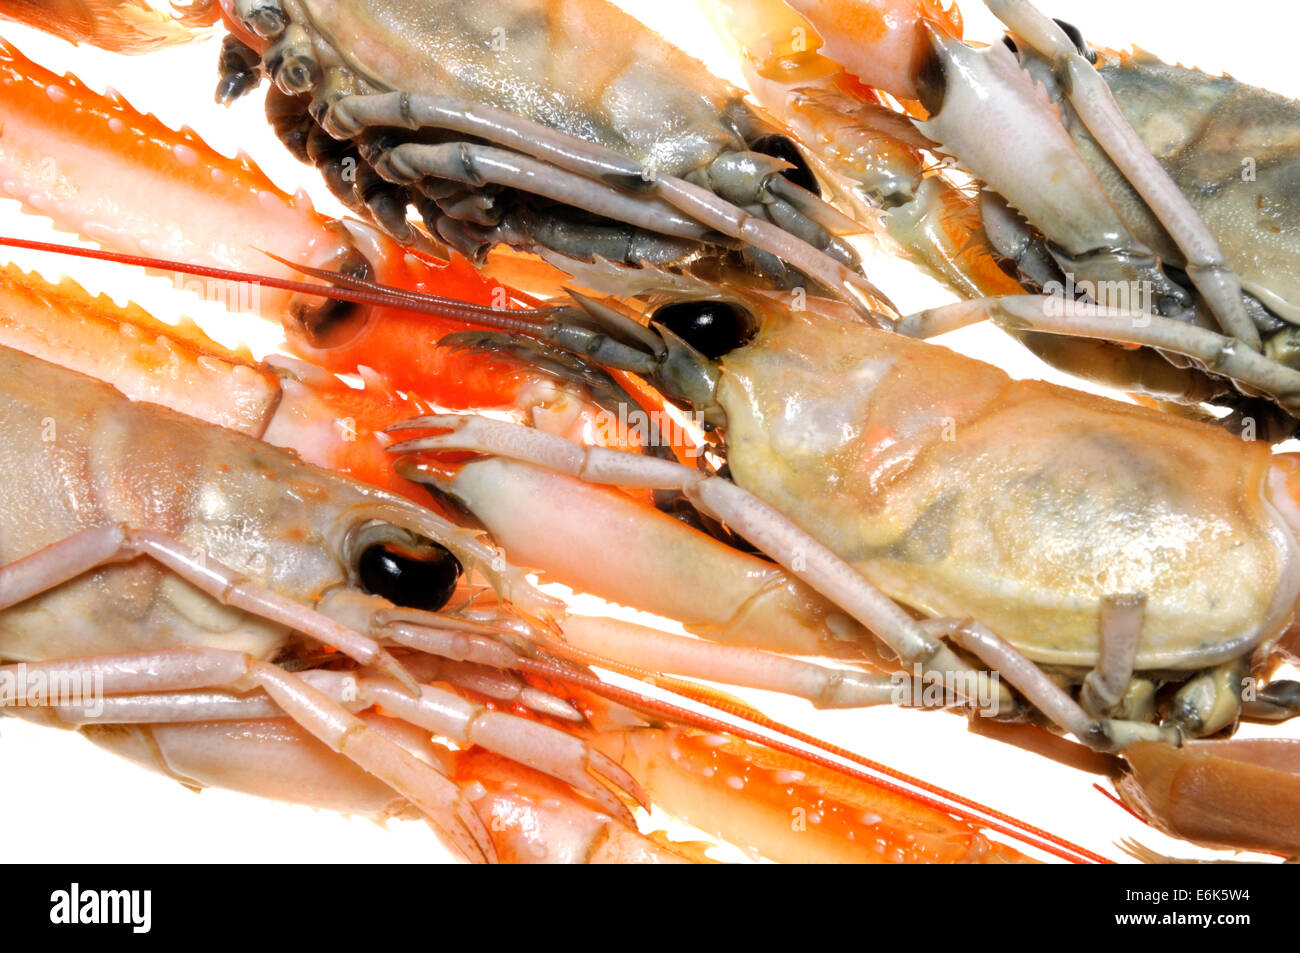 Raw Langoustine (Nephrops norvegicus) known as the Norway lobster, Dublin Bay prawn, or scampi Stock Photo